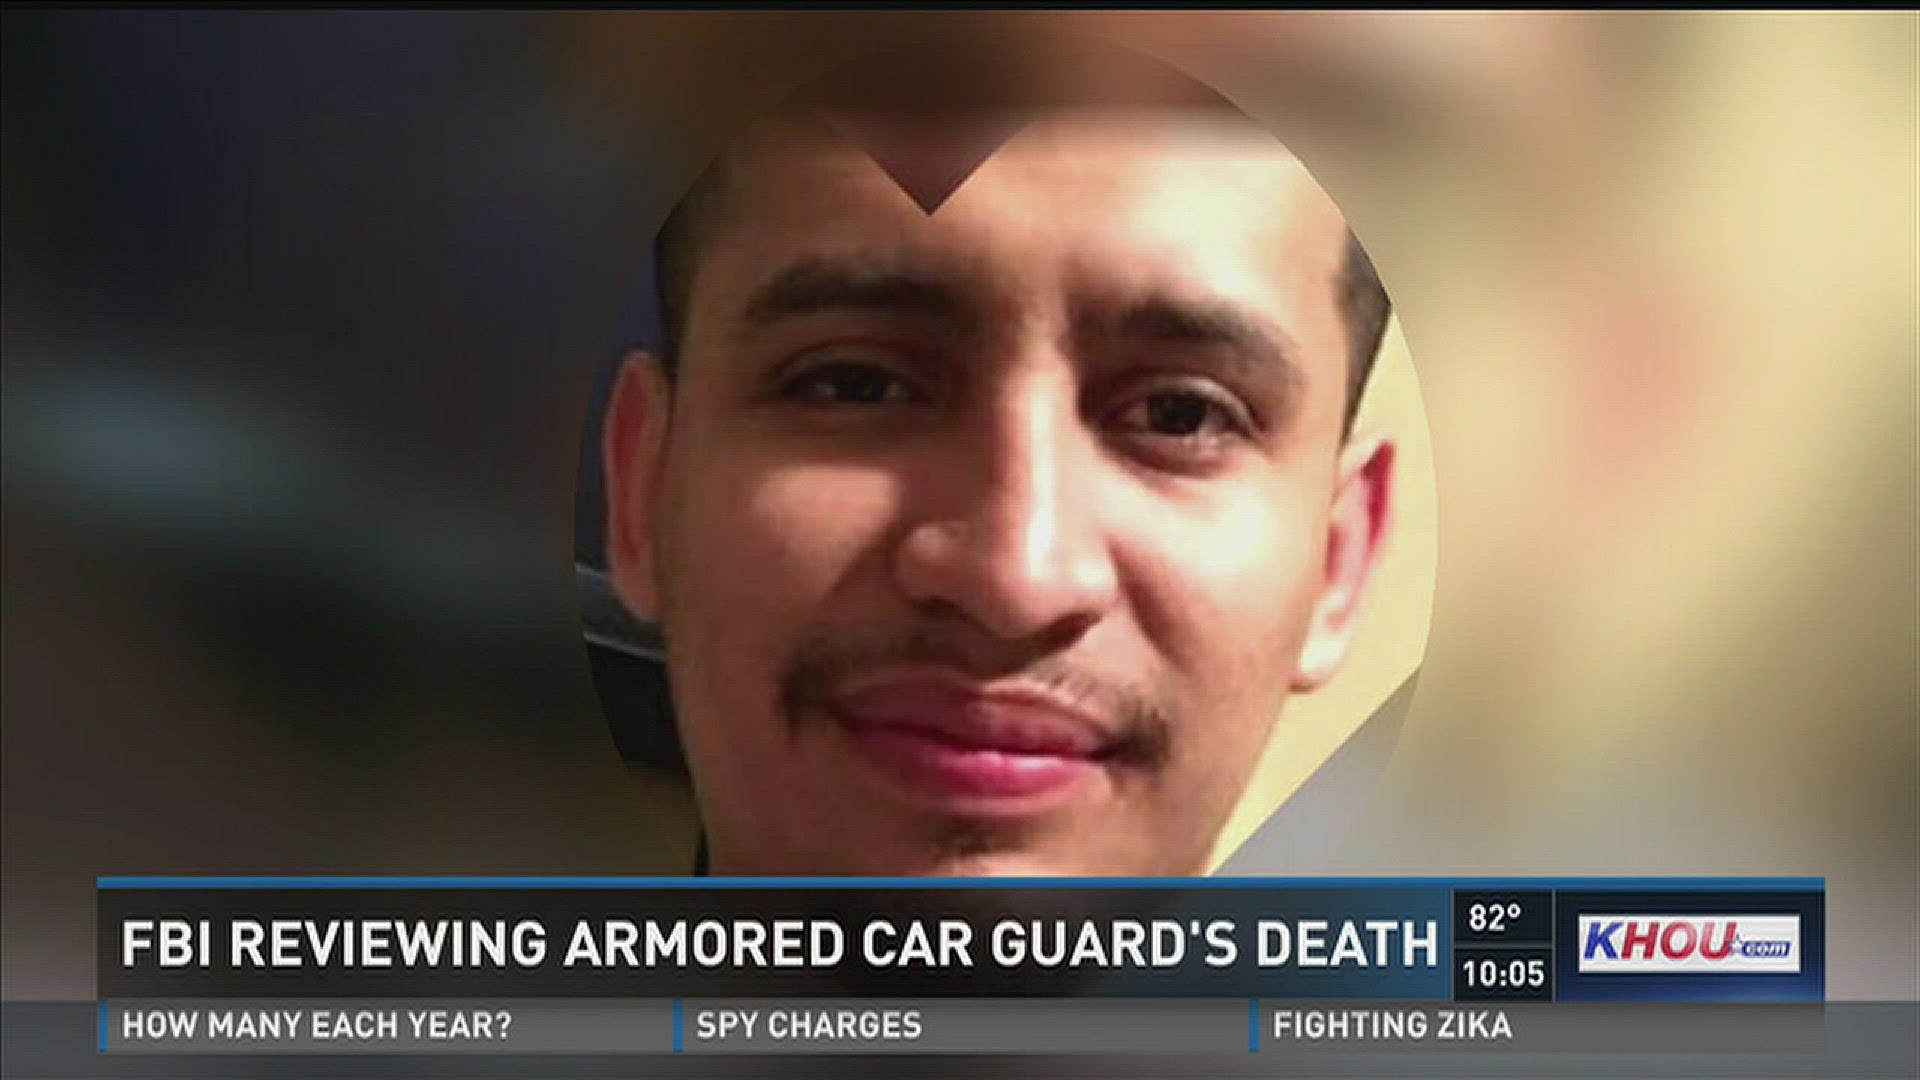 David Guzman, 25, was killed Monday at a northwest Houston bank while he was servicing an ATM.